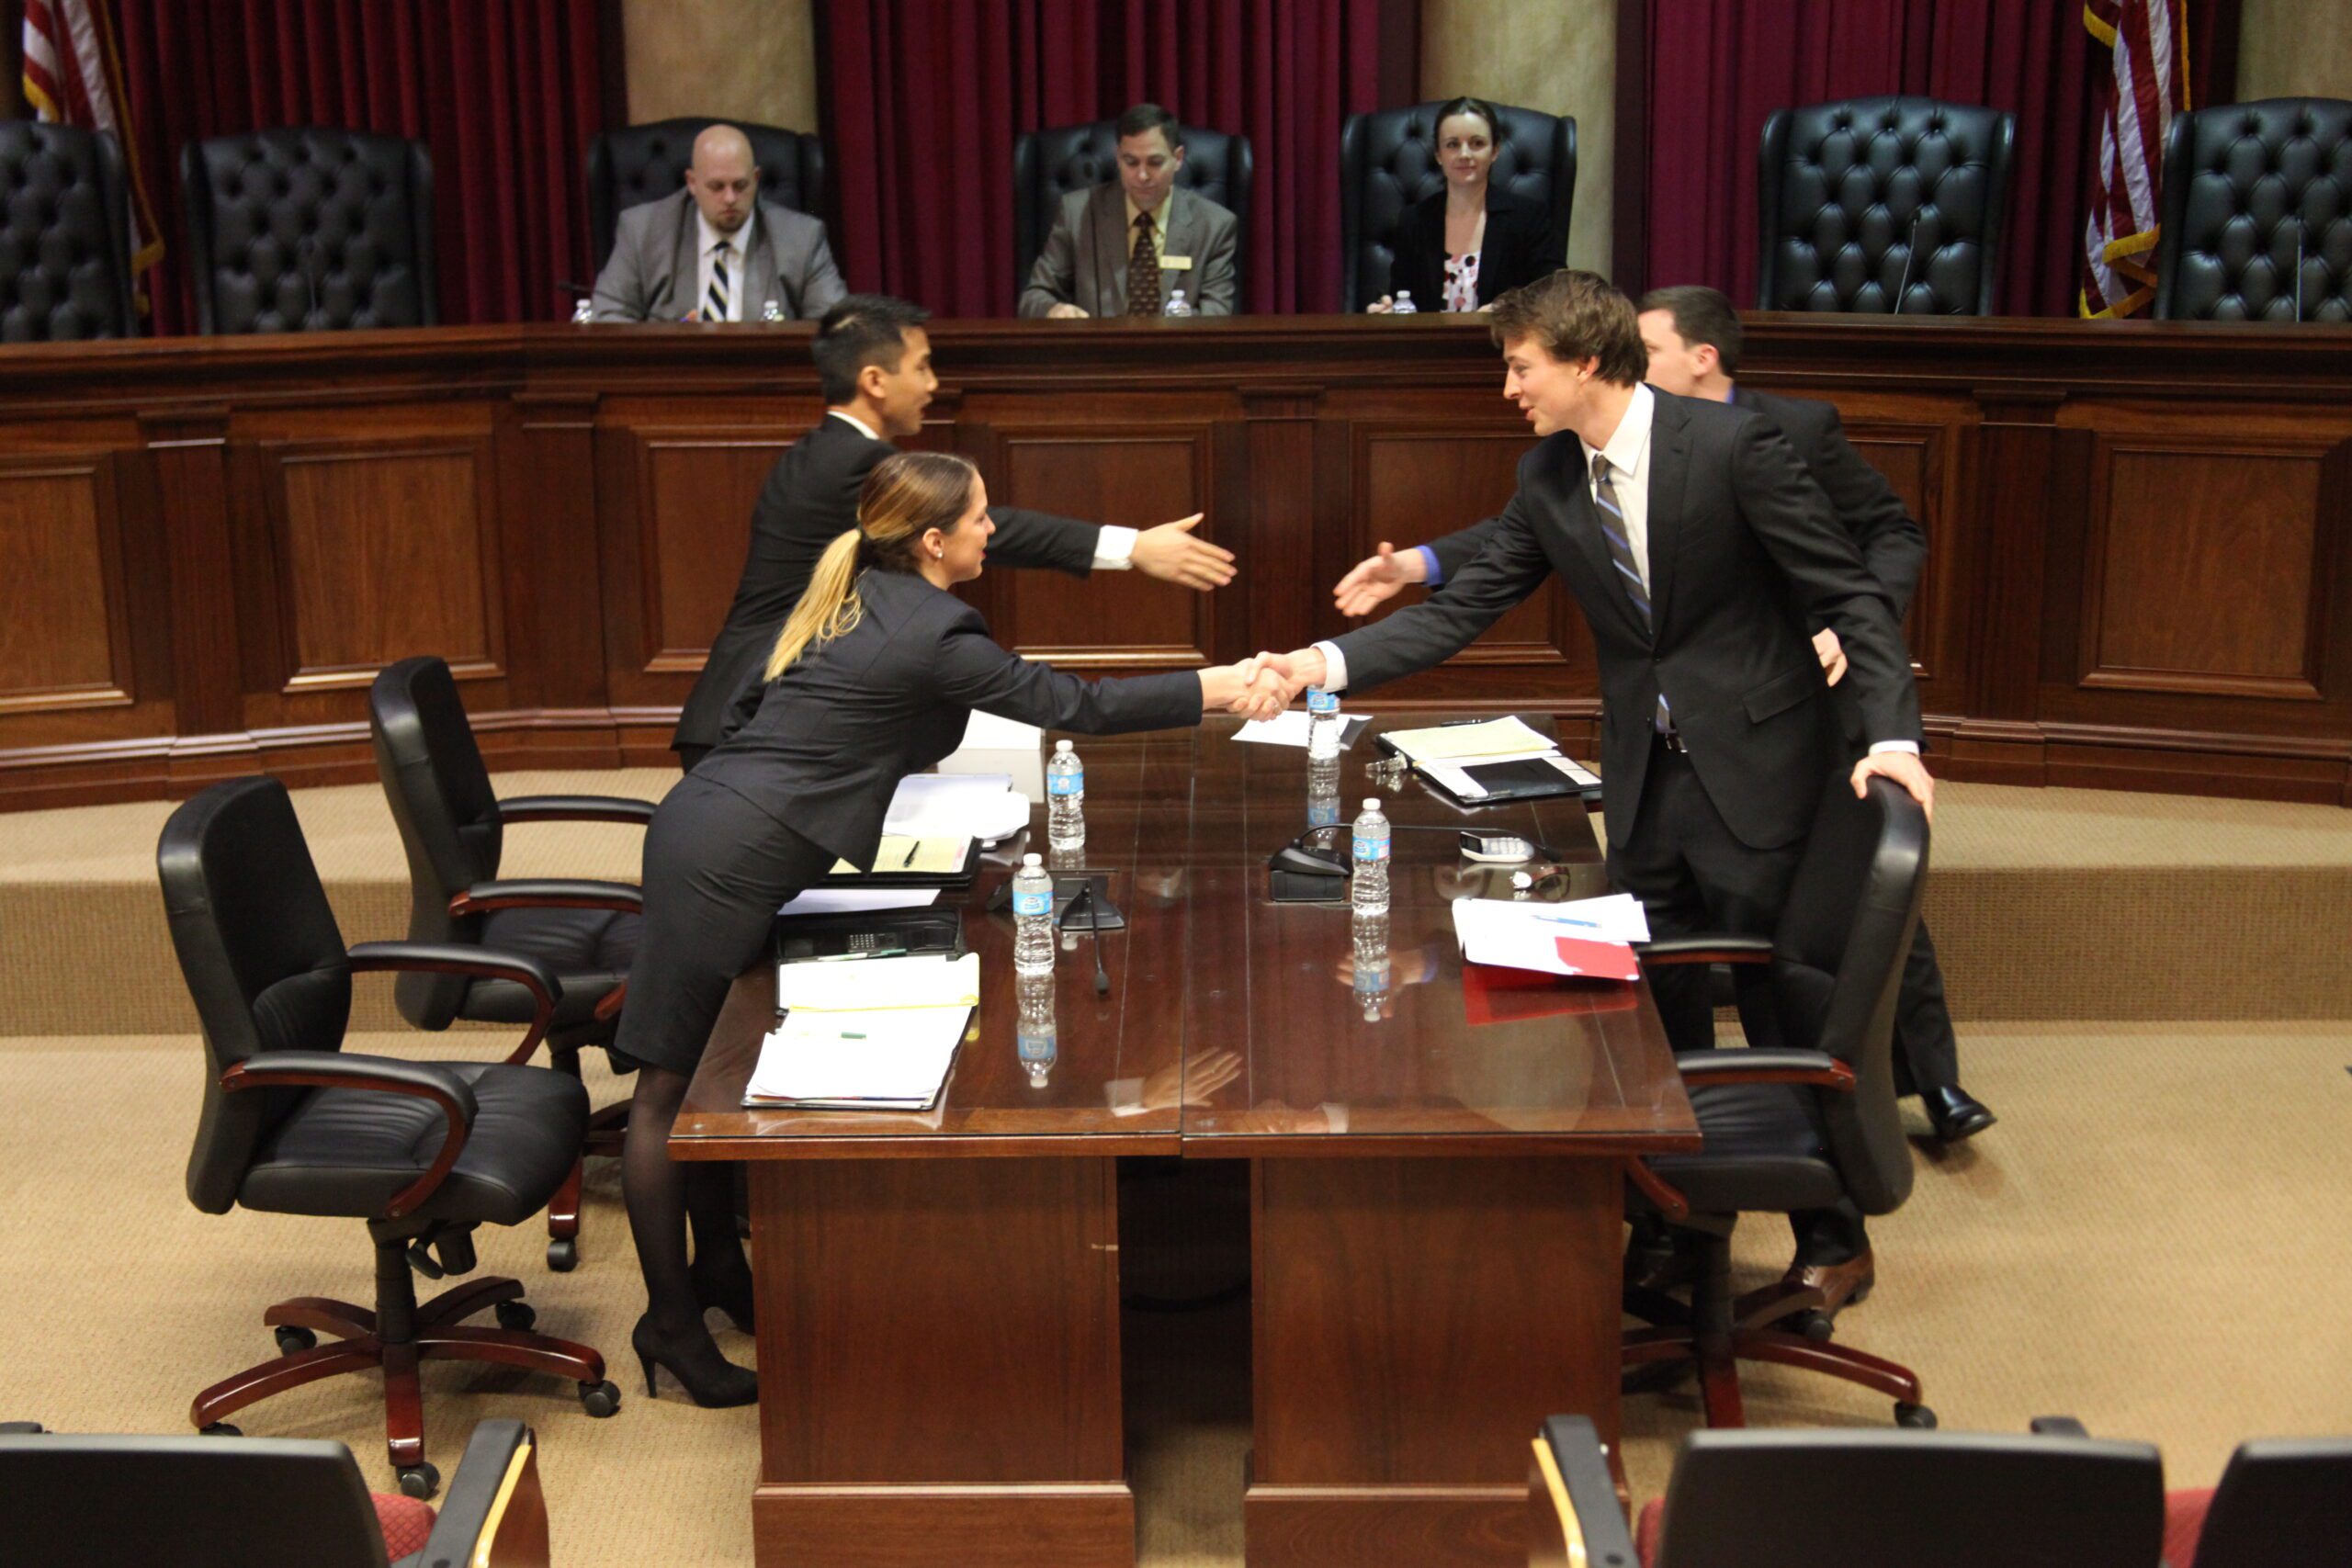 two trial teams, shaking hands across the table after a match